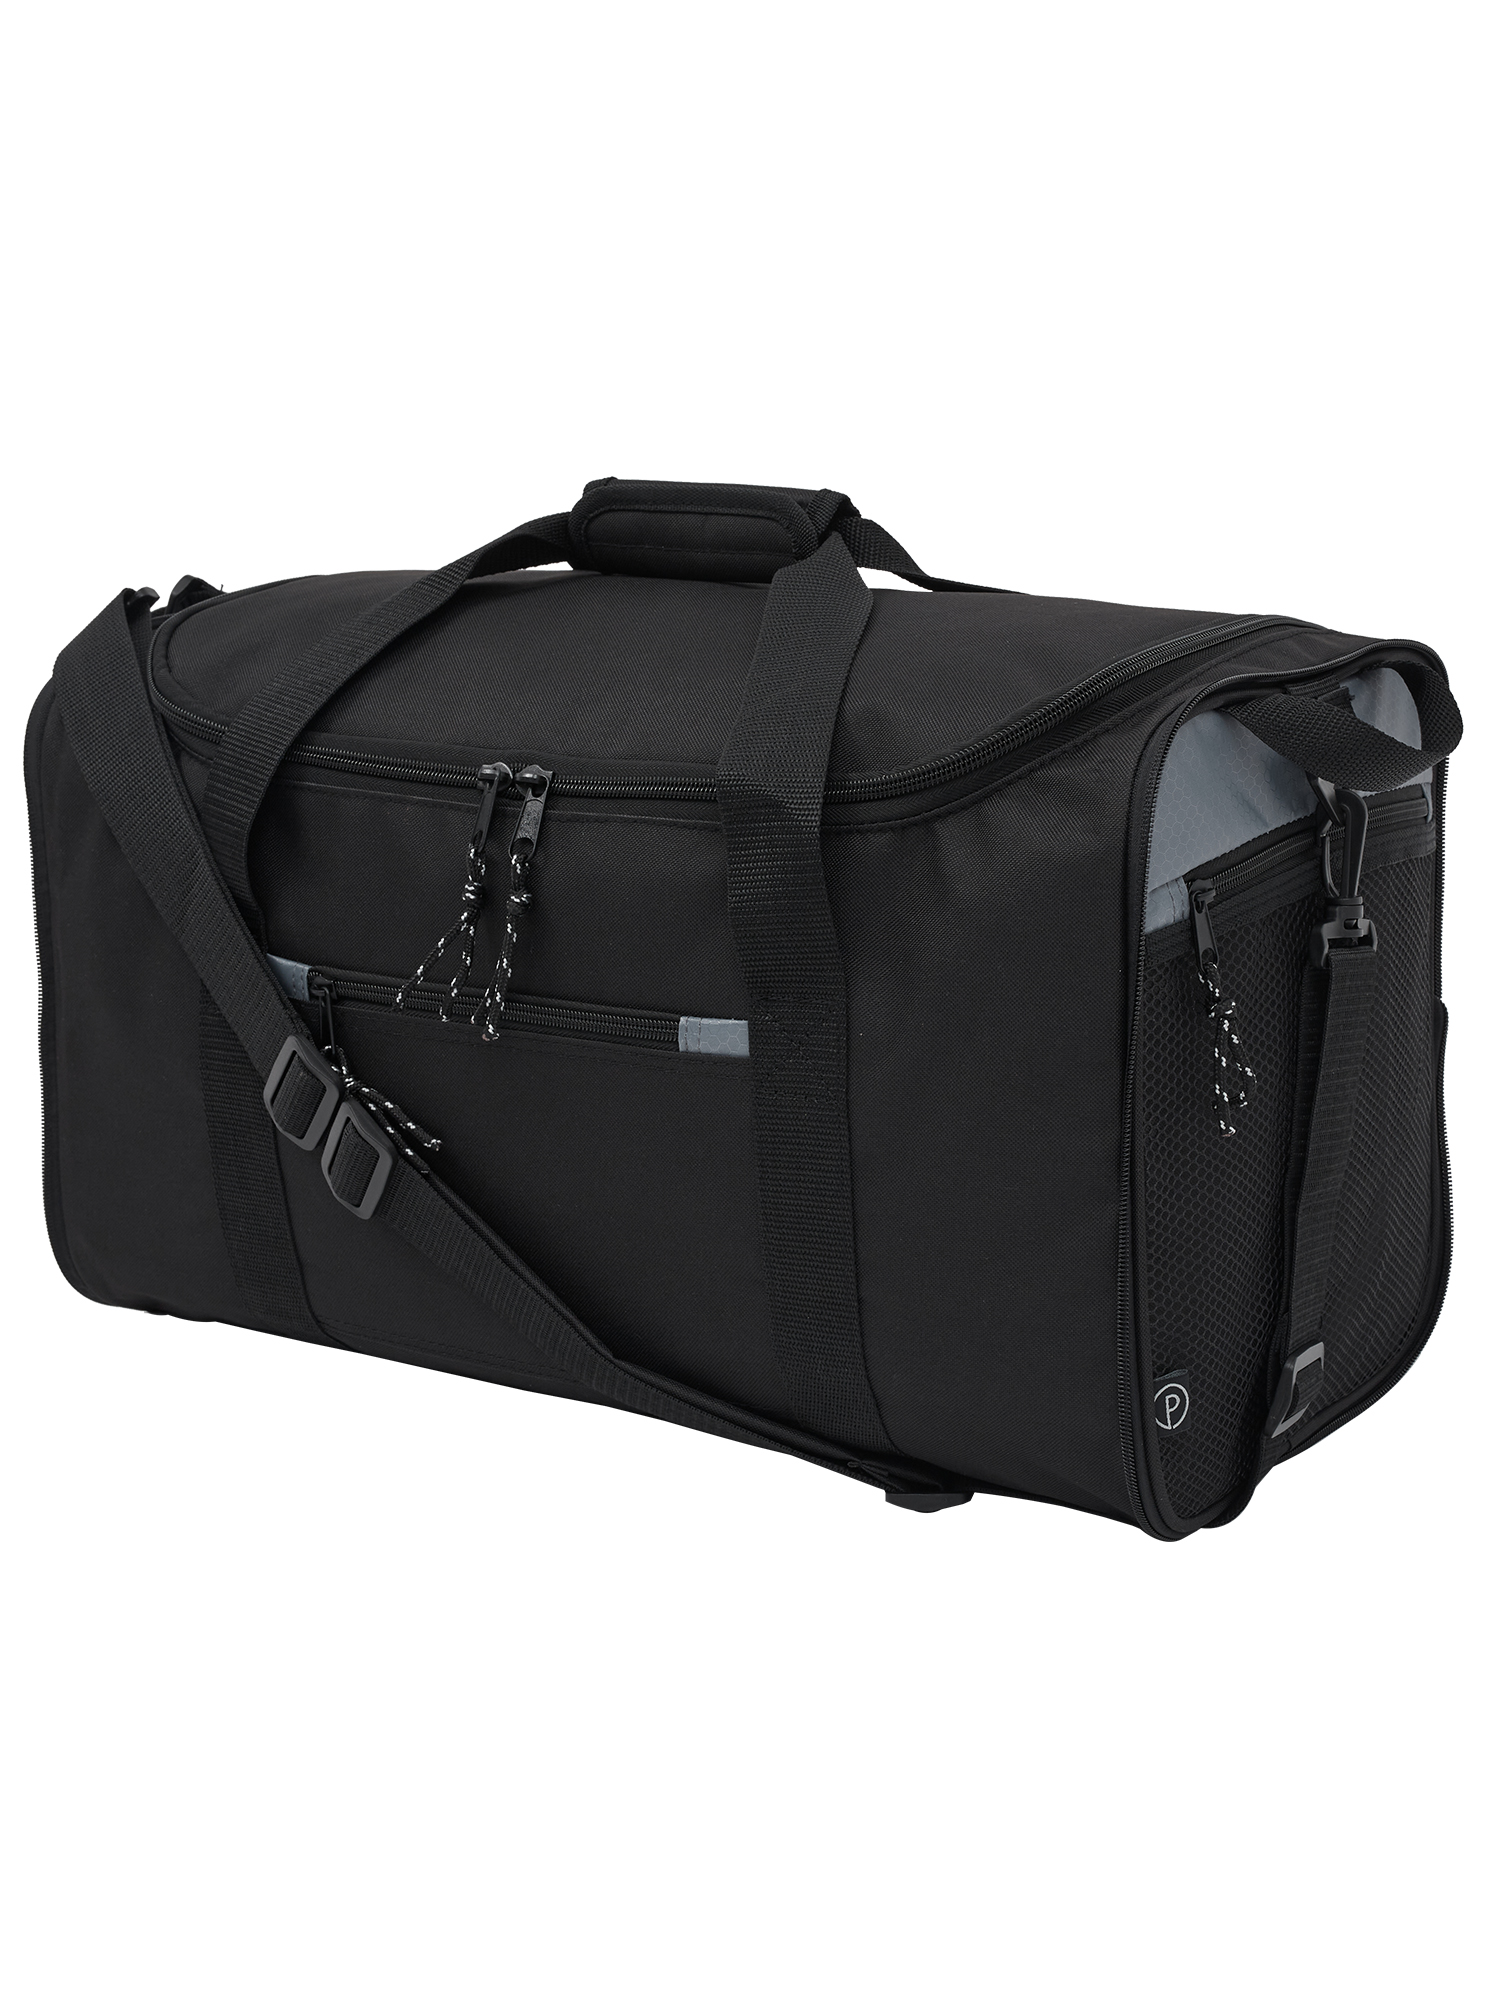 Protégé 20" Collapsible Sport and Travel Duffel Bag, Black - image 2 of 9